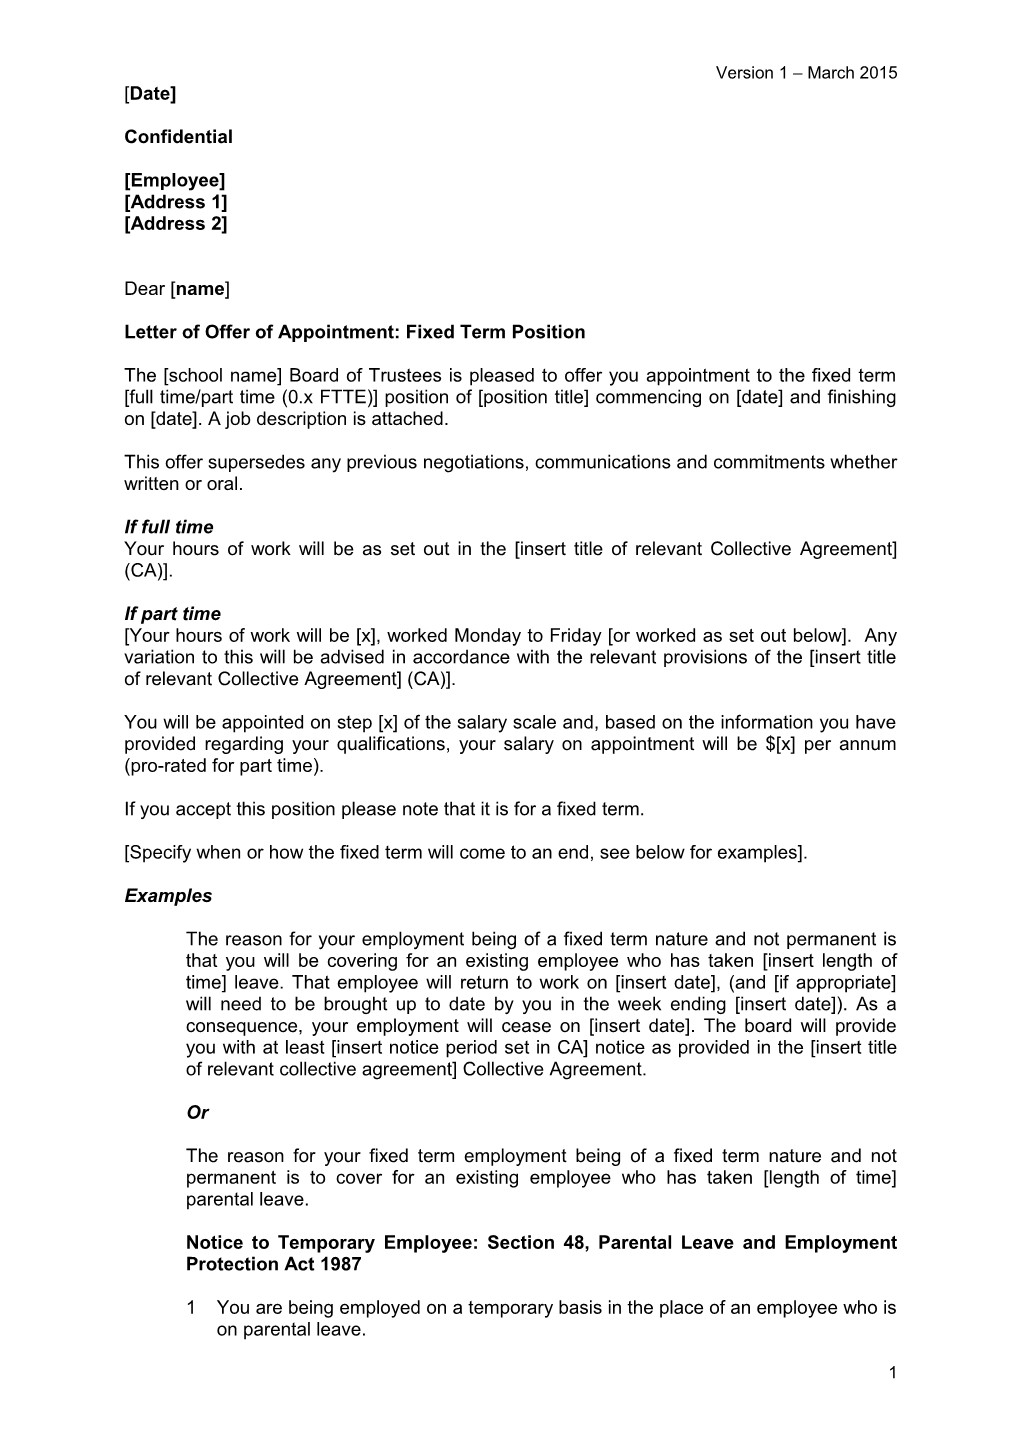 Letter of Offer of Appointment: Fixed Term Position